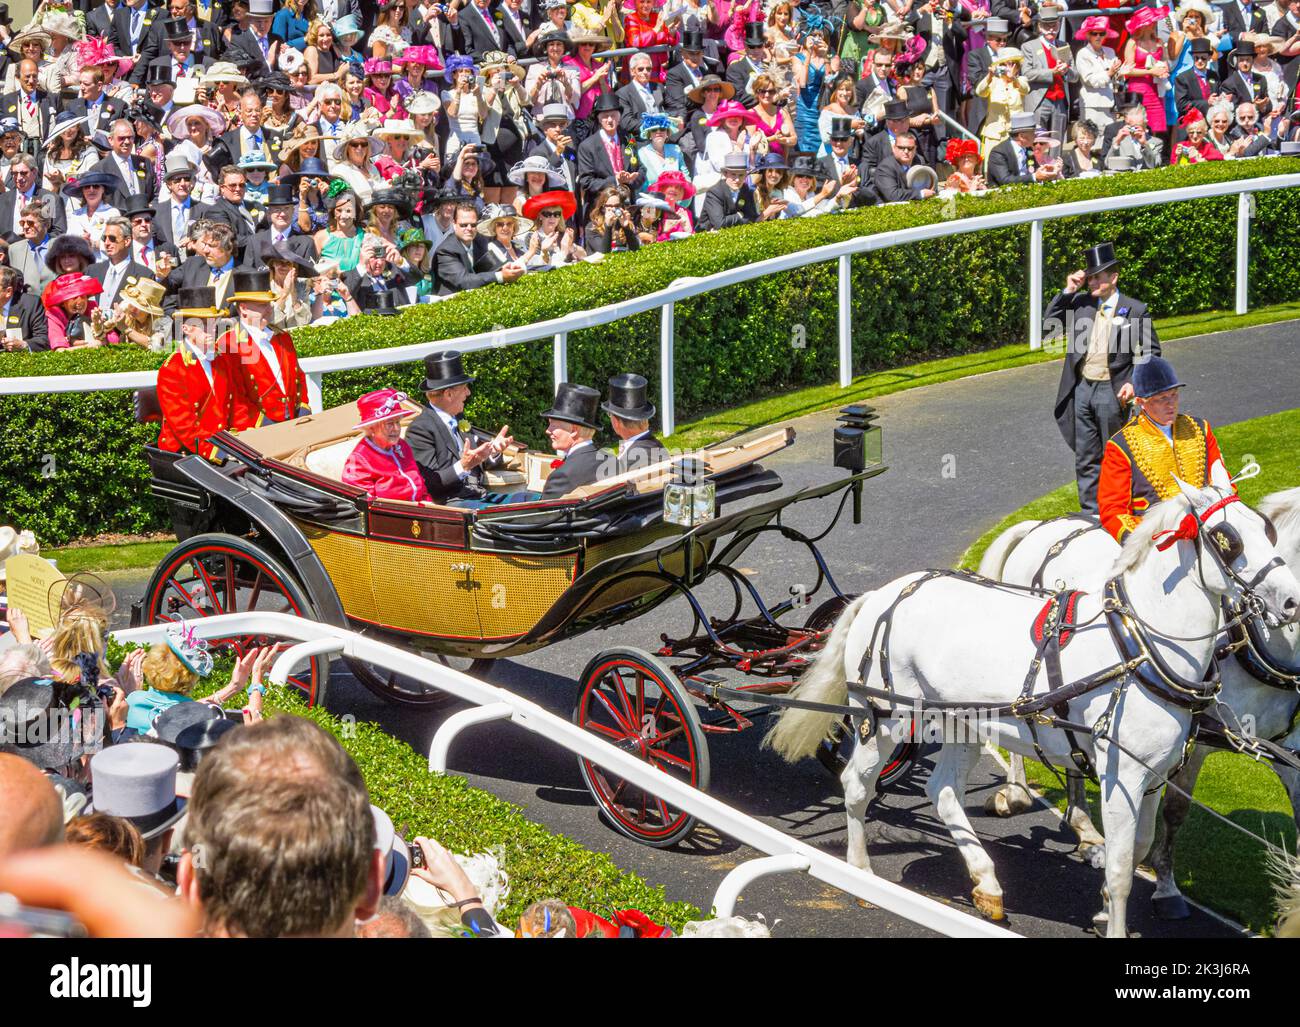 HM Queen Elizabeth II and HRH Prince Philip Duke of Edinburgh enter the Parade Ring in a carriage during Royal Ascot, Ascot Racecourse, Ascot, Berks Stock Photo